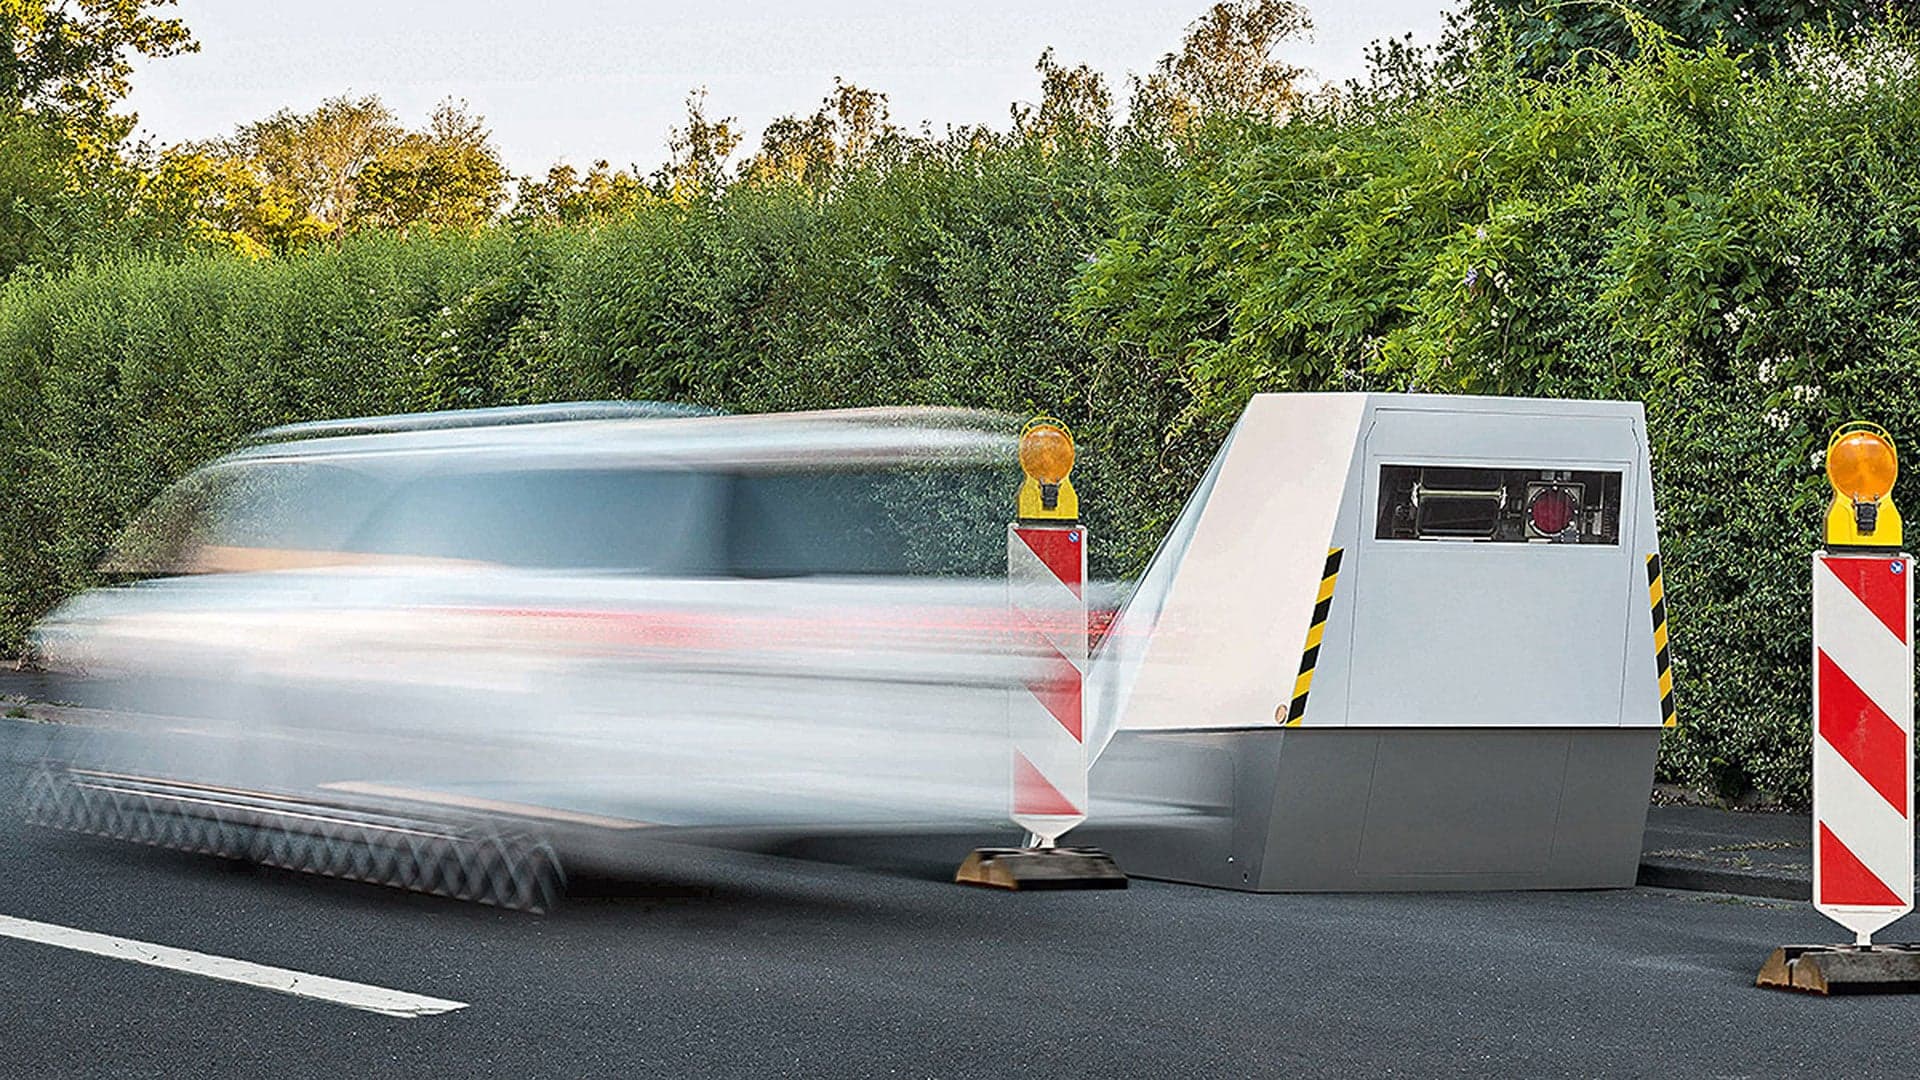 Vitronic’s Bulletproof Enforcement Trailer Could Be the Future of Speed Traps